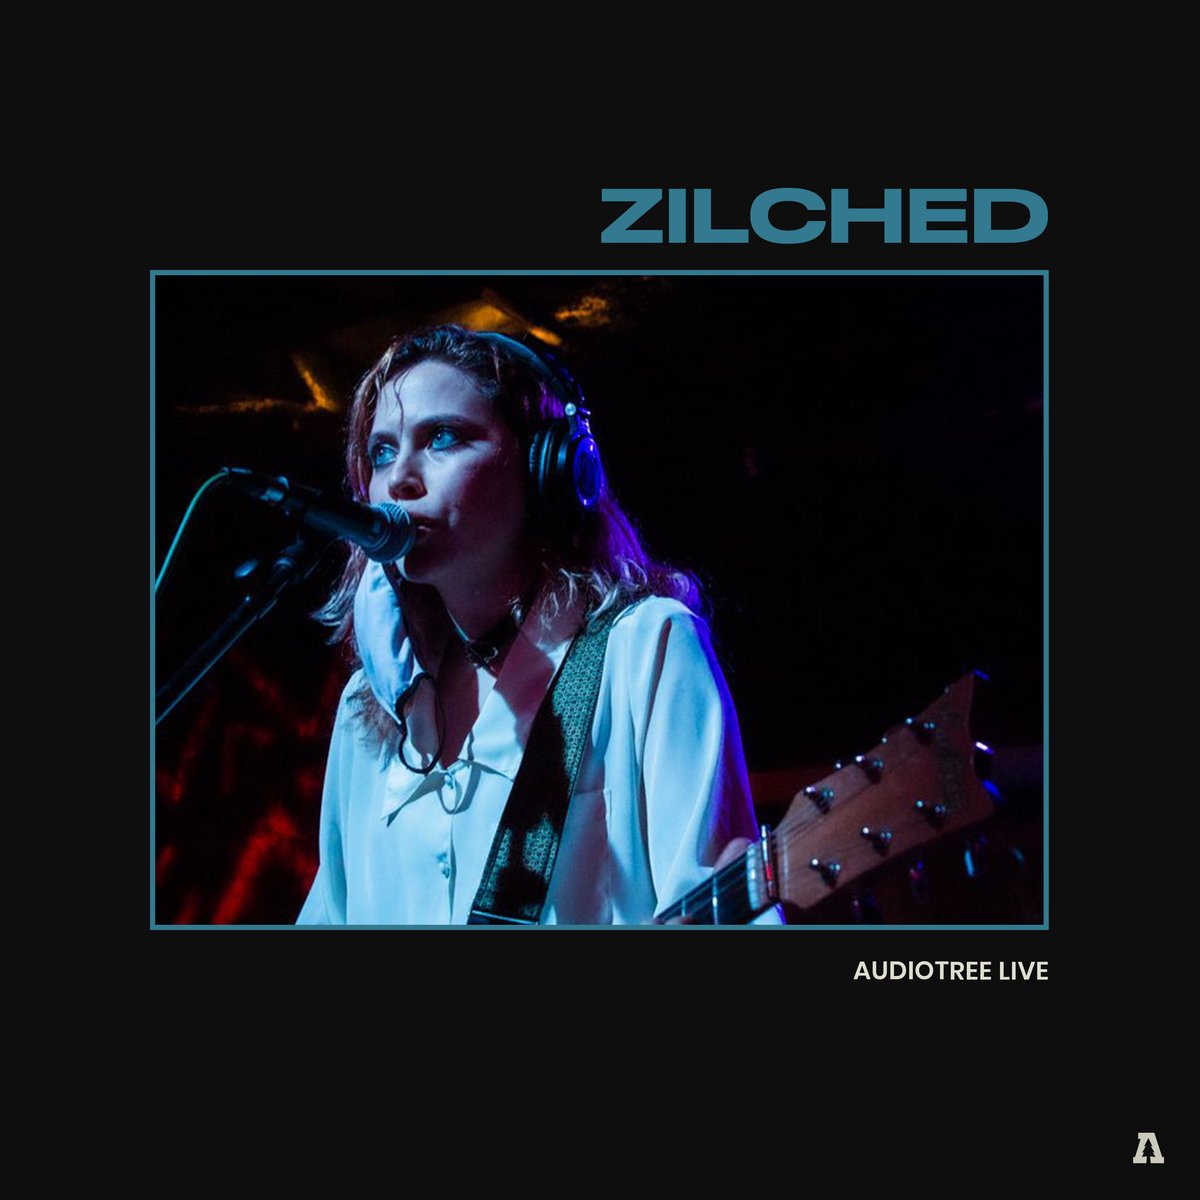 Zilched on Audiotree Live